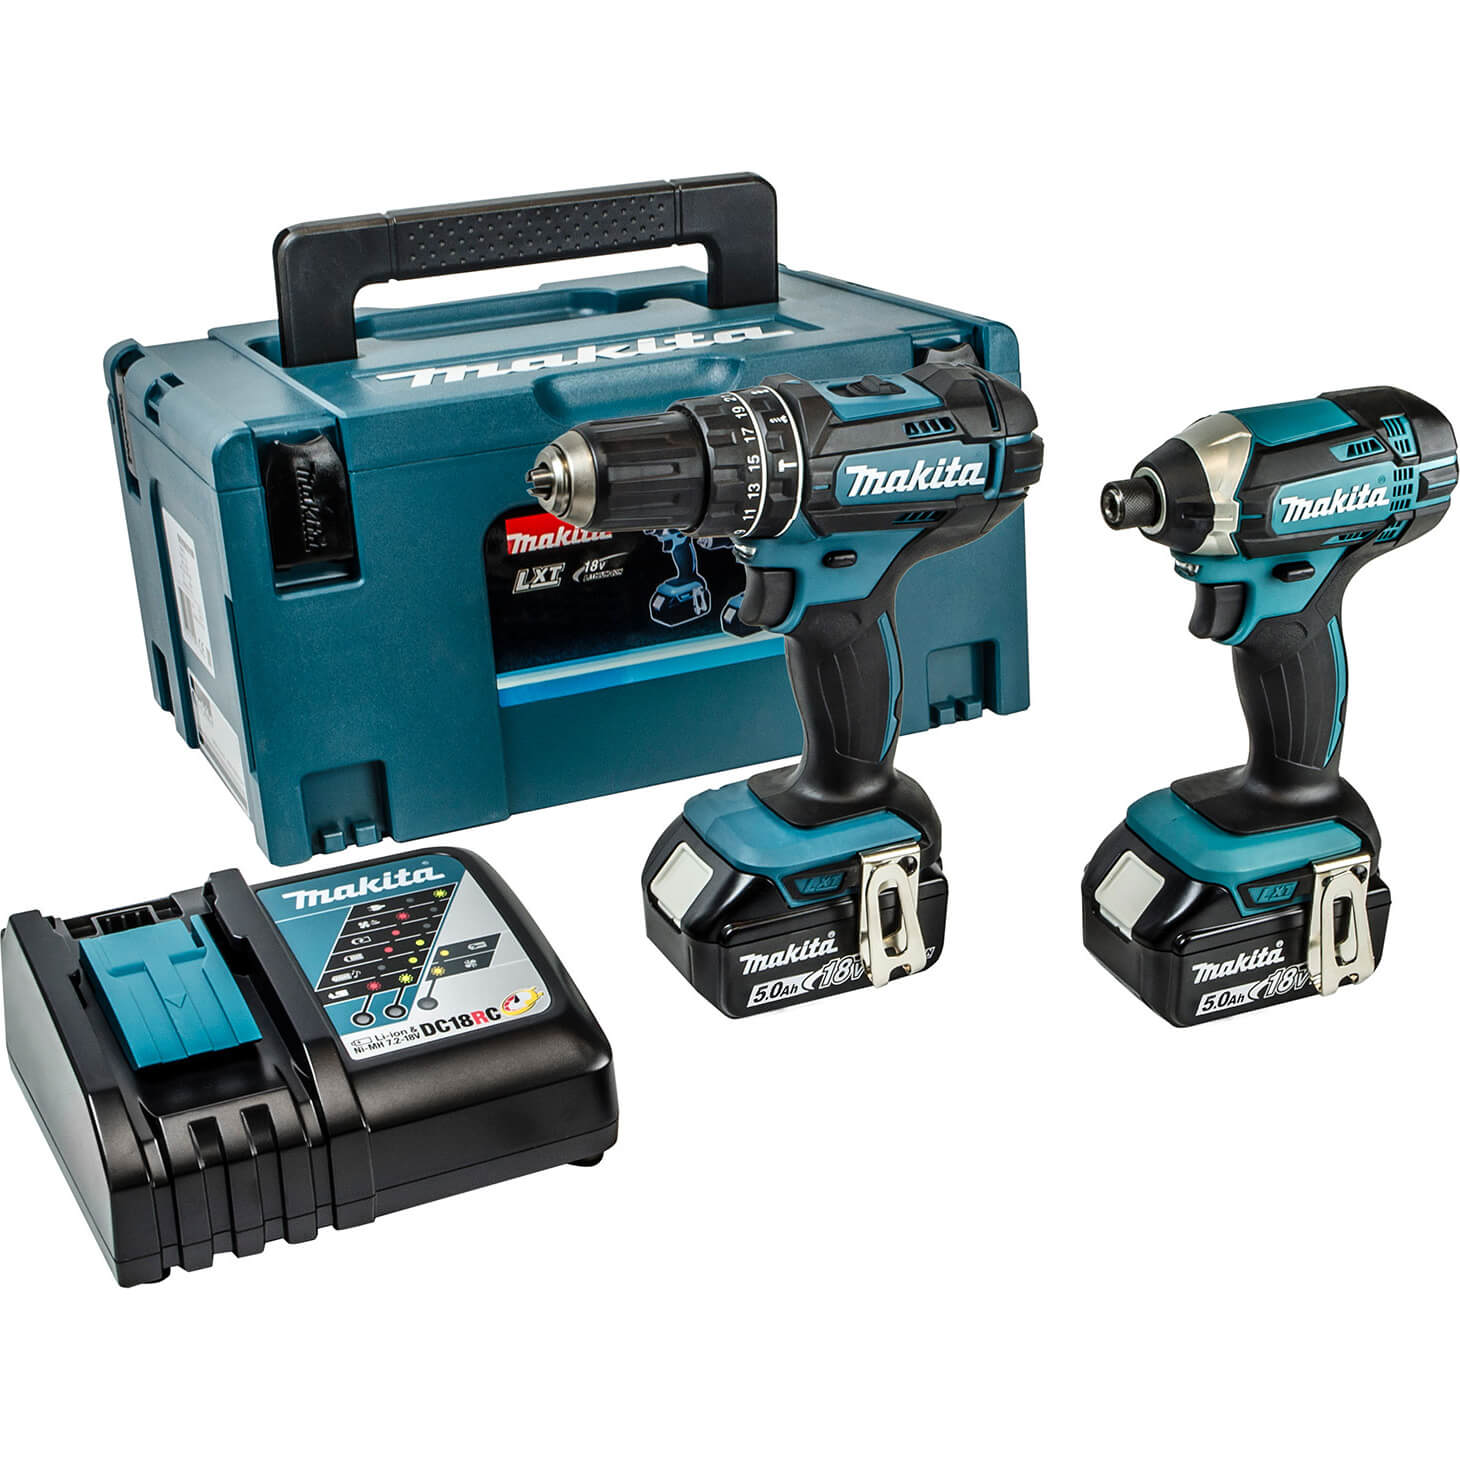 Image of Makita DLX2131 18v LXT Cordless Combi Drill and Impact Driver Kit 2 x 5ah Li-ion Charger Case